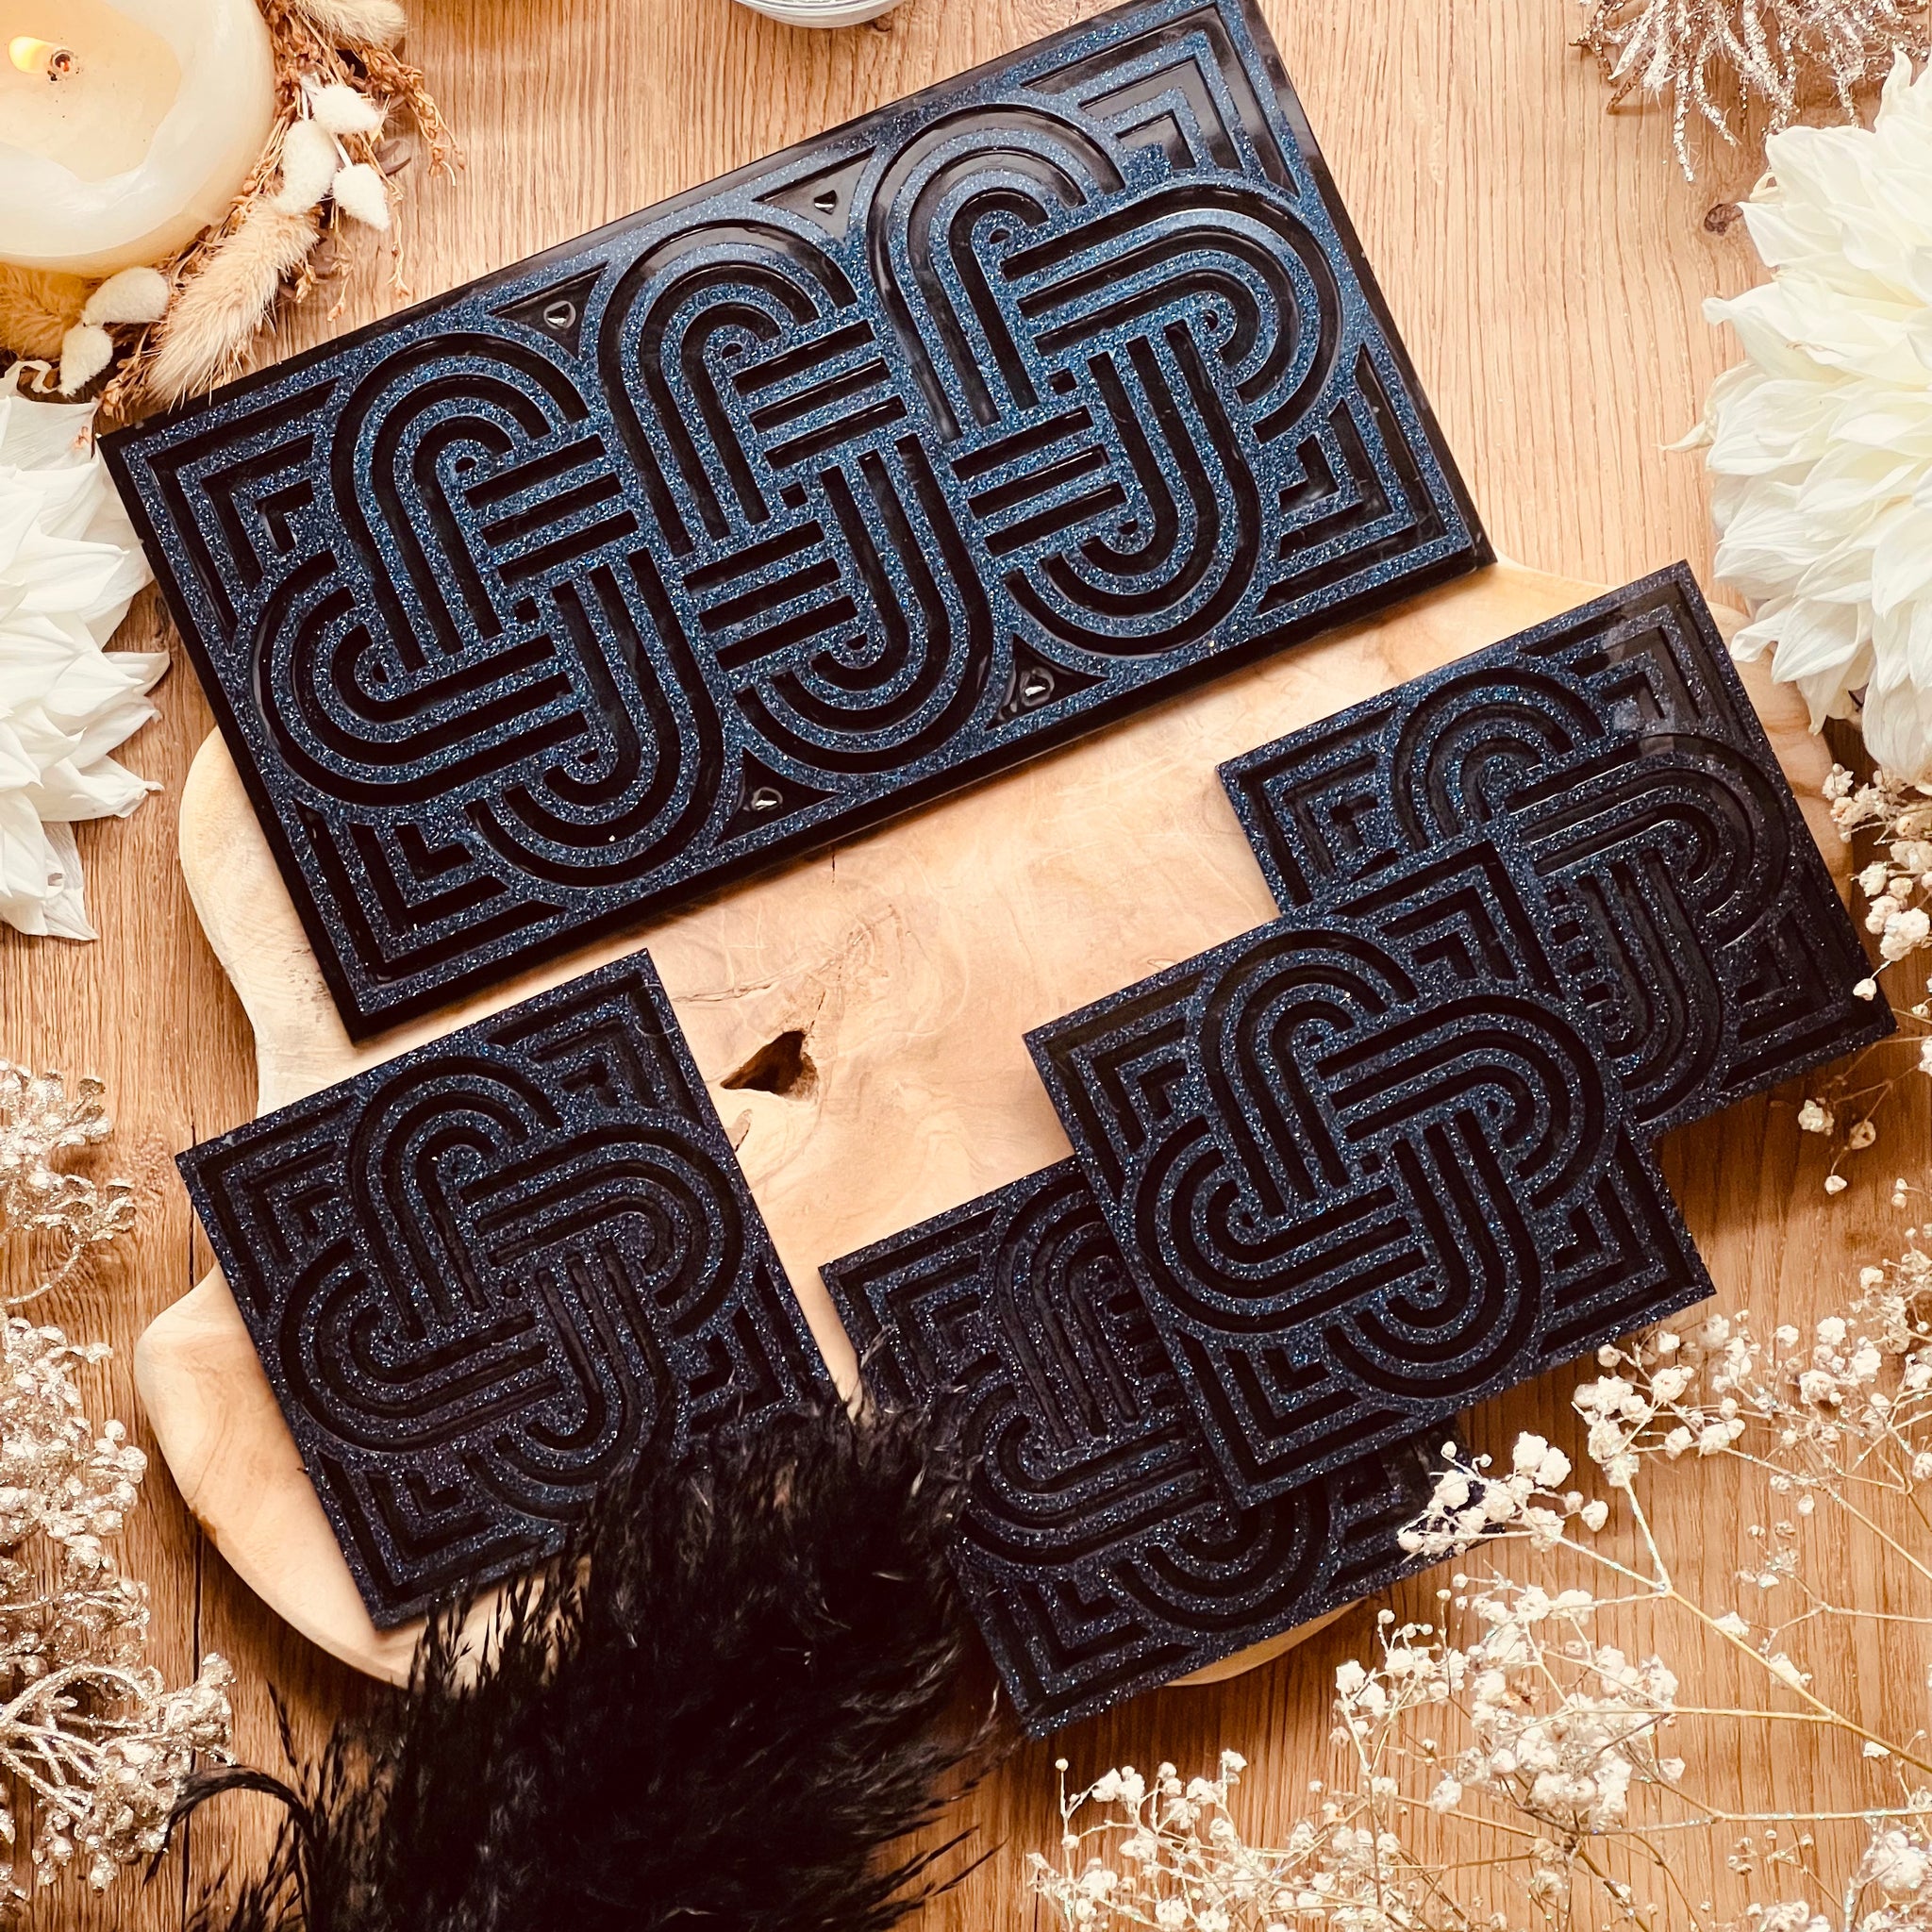 Tray and 4 coasters made of resin in dark blue with glitter in knot design